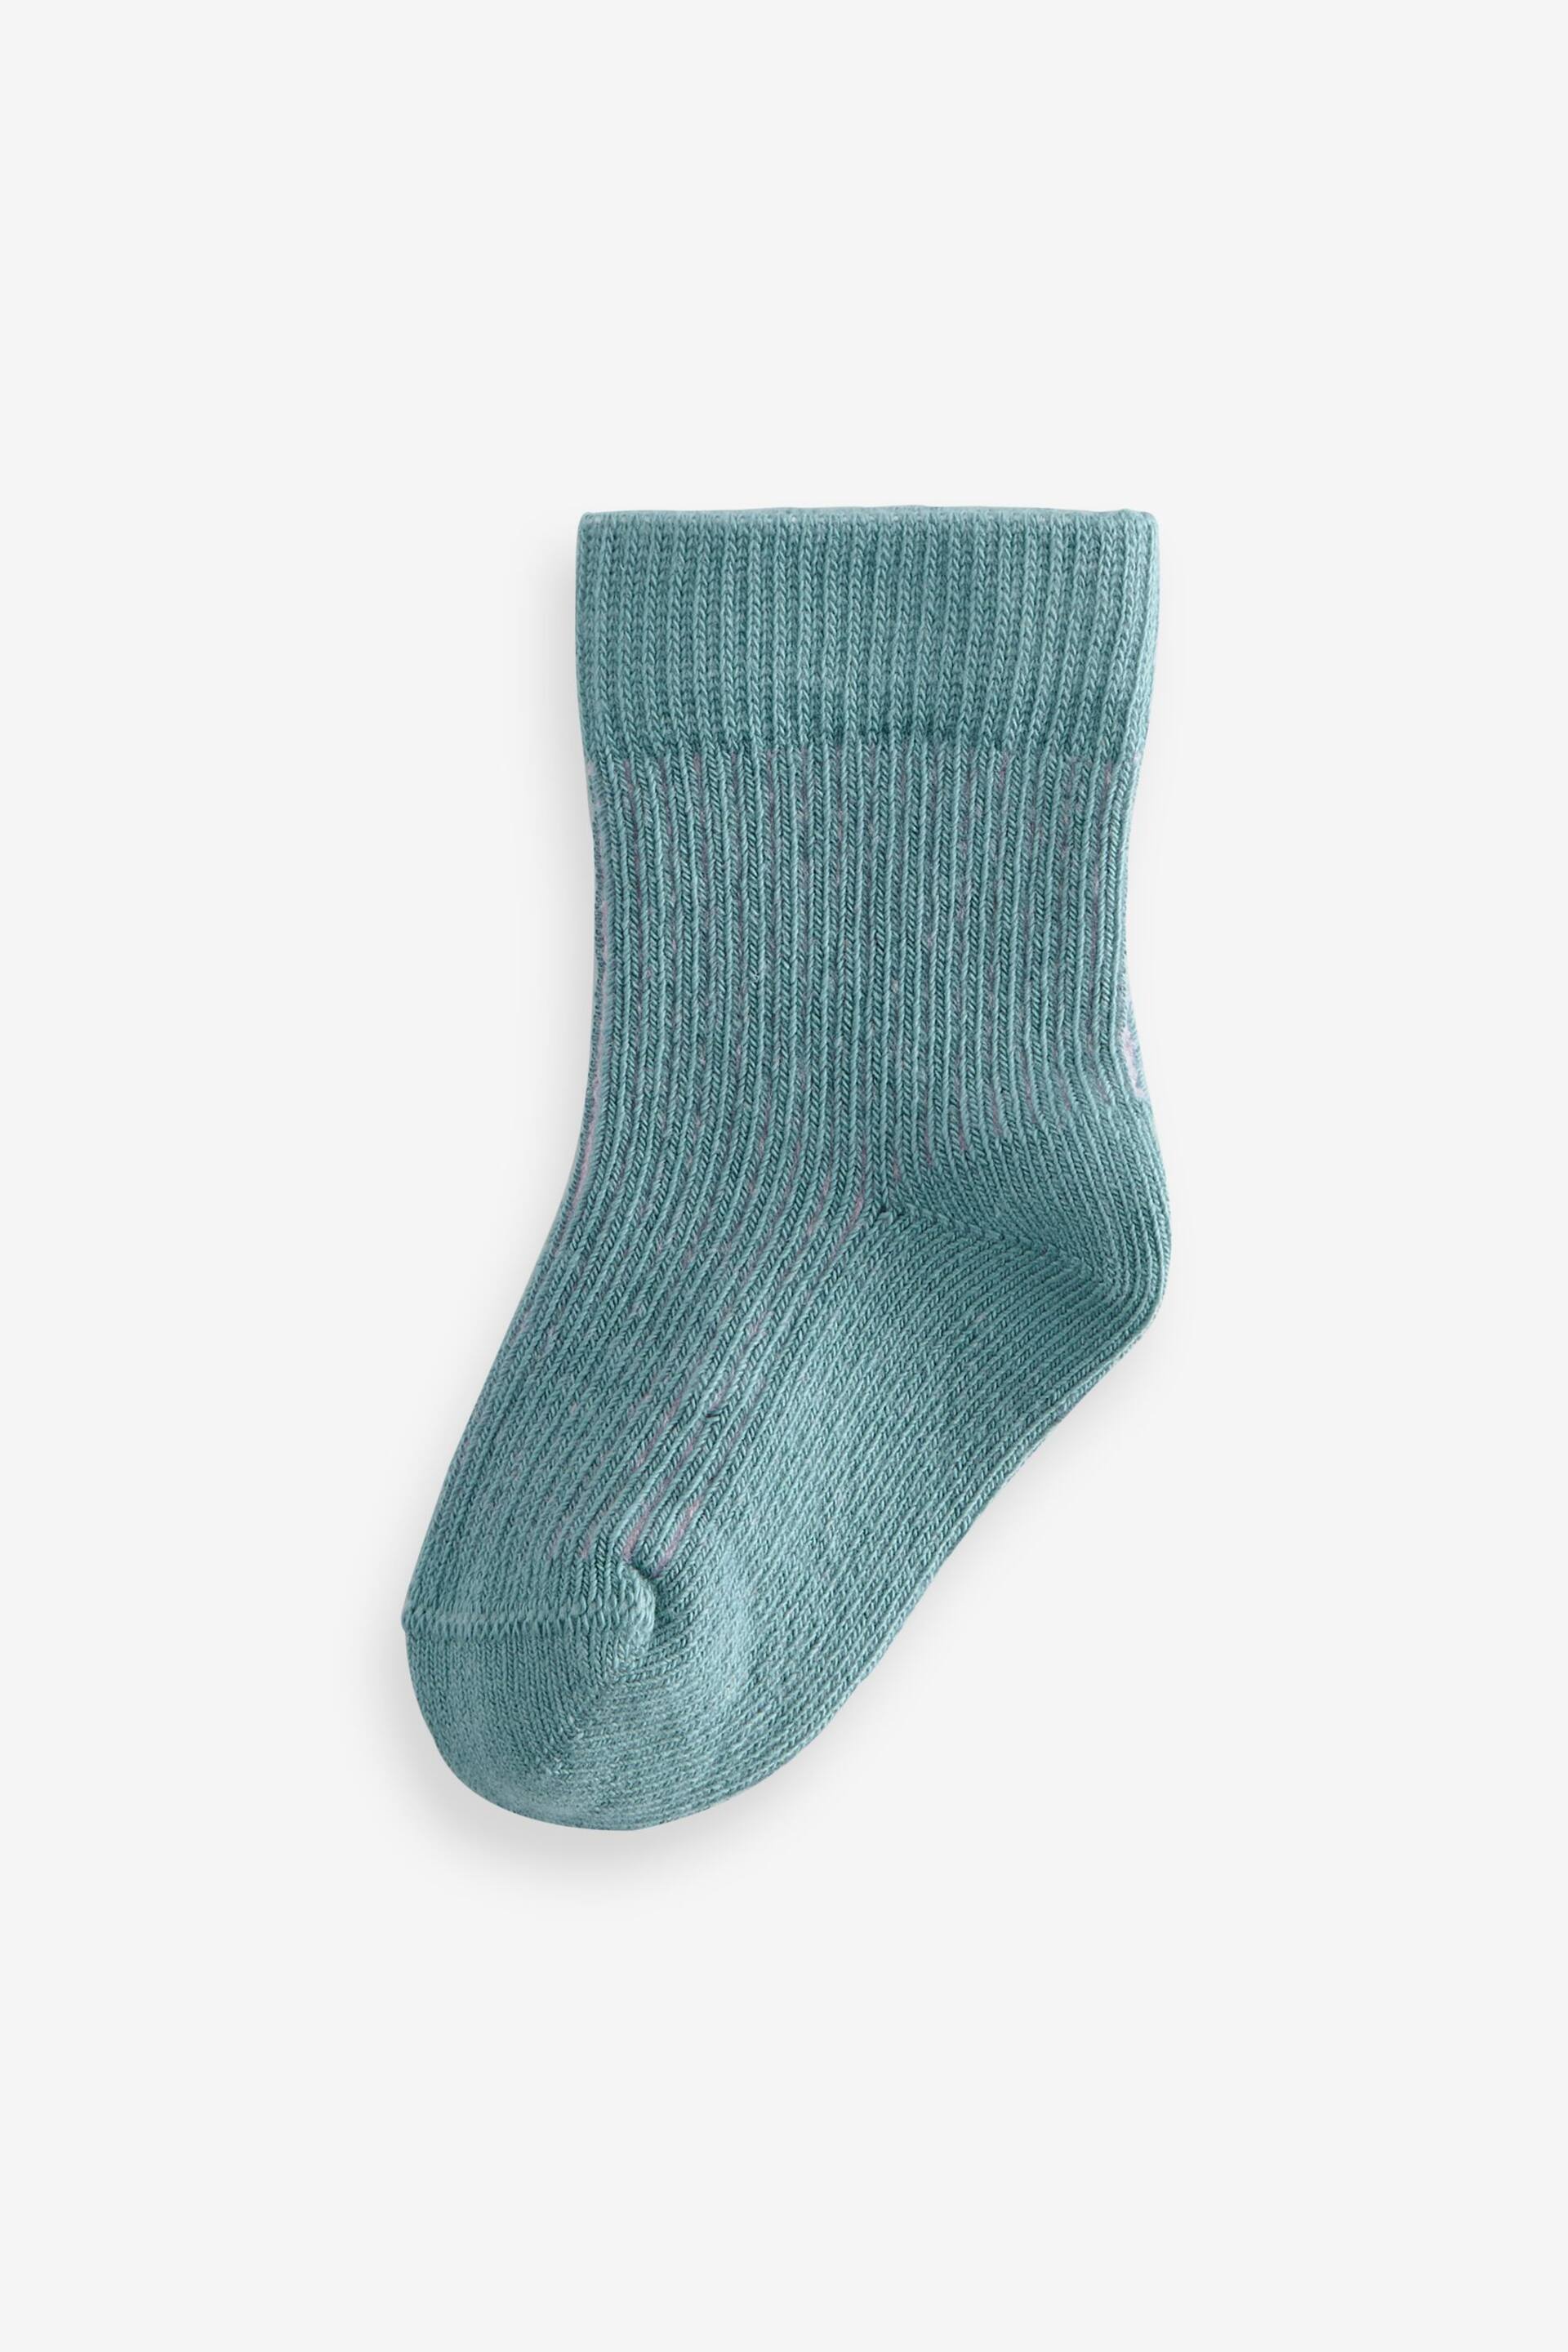 Blue Baby Socks 5 Pack (0mths-2yrs) - Image 5 of 6